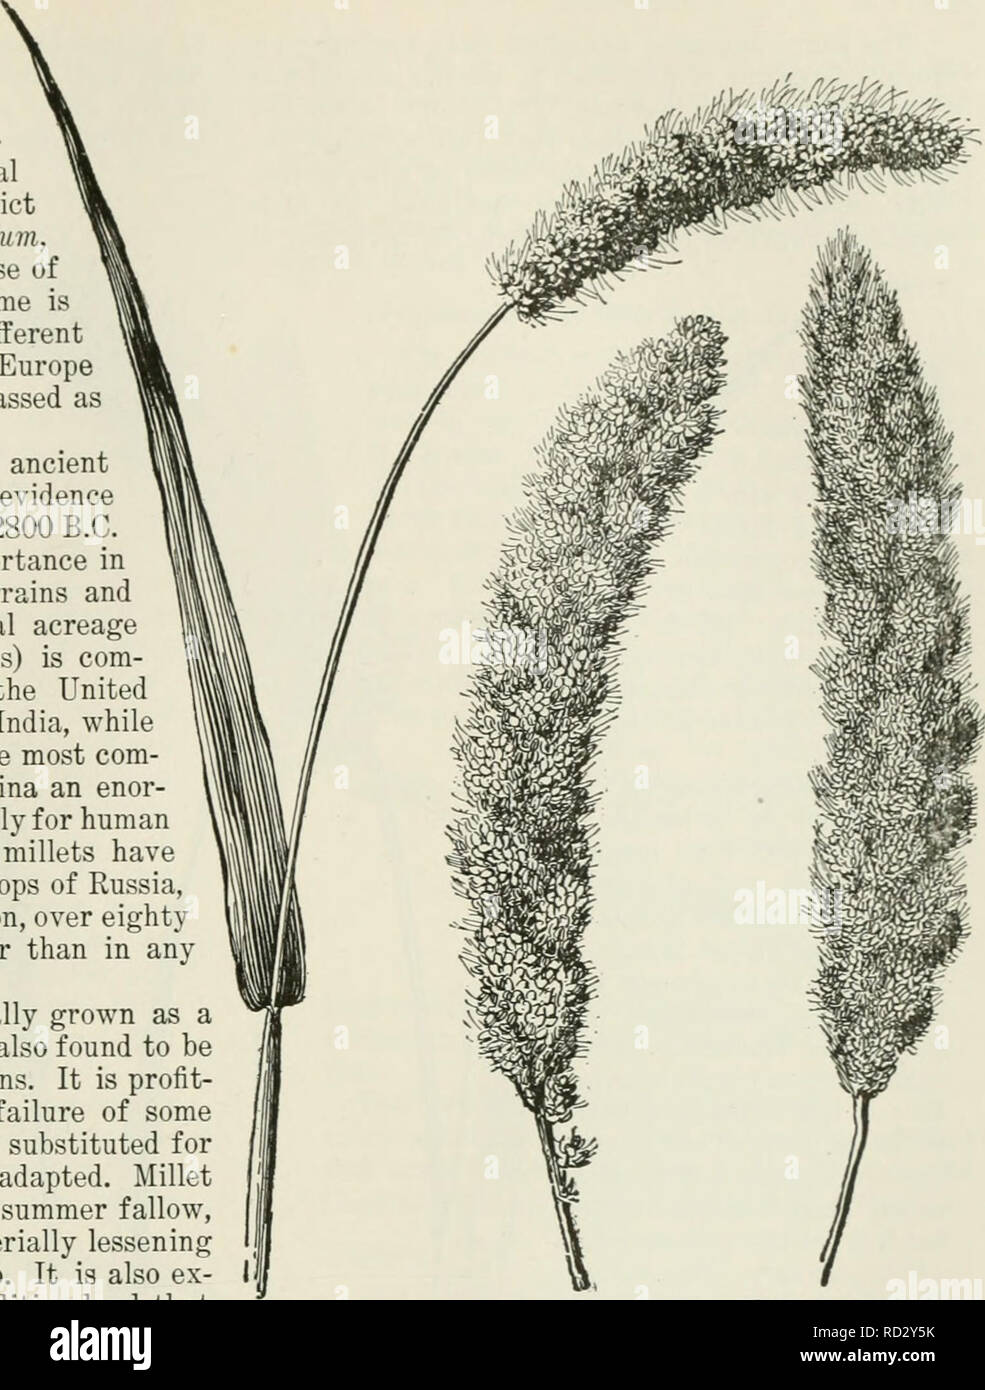 . Cyclopedia of farm crops : a popular survey of crops and crop-making methods in the United States and Canada. Agriculture -- Canada; Agriculture -- United States; Farm produce -- Canada; Farm produce -- United States. MILLETS MILLETS. Figs. 693-702. By .1/. A. Carleton. The millets are cultivated varie- ties of certain small-seeded cereal and forage grasses, which, in a strict sense, belong to the genus Panicum, or to closely allied genera. Because of a resemblance in the seed the name is also applied to other grasses of different genera in this country, while in Europe and Asia even the sor Stock Photo